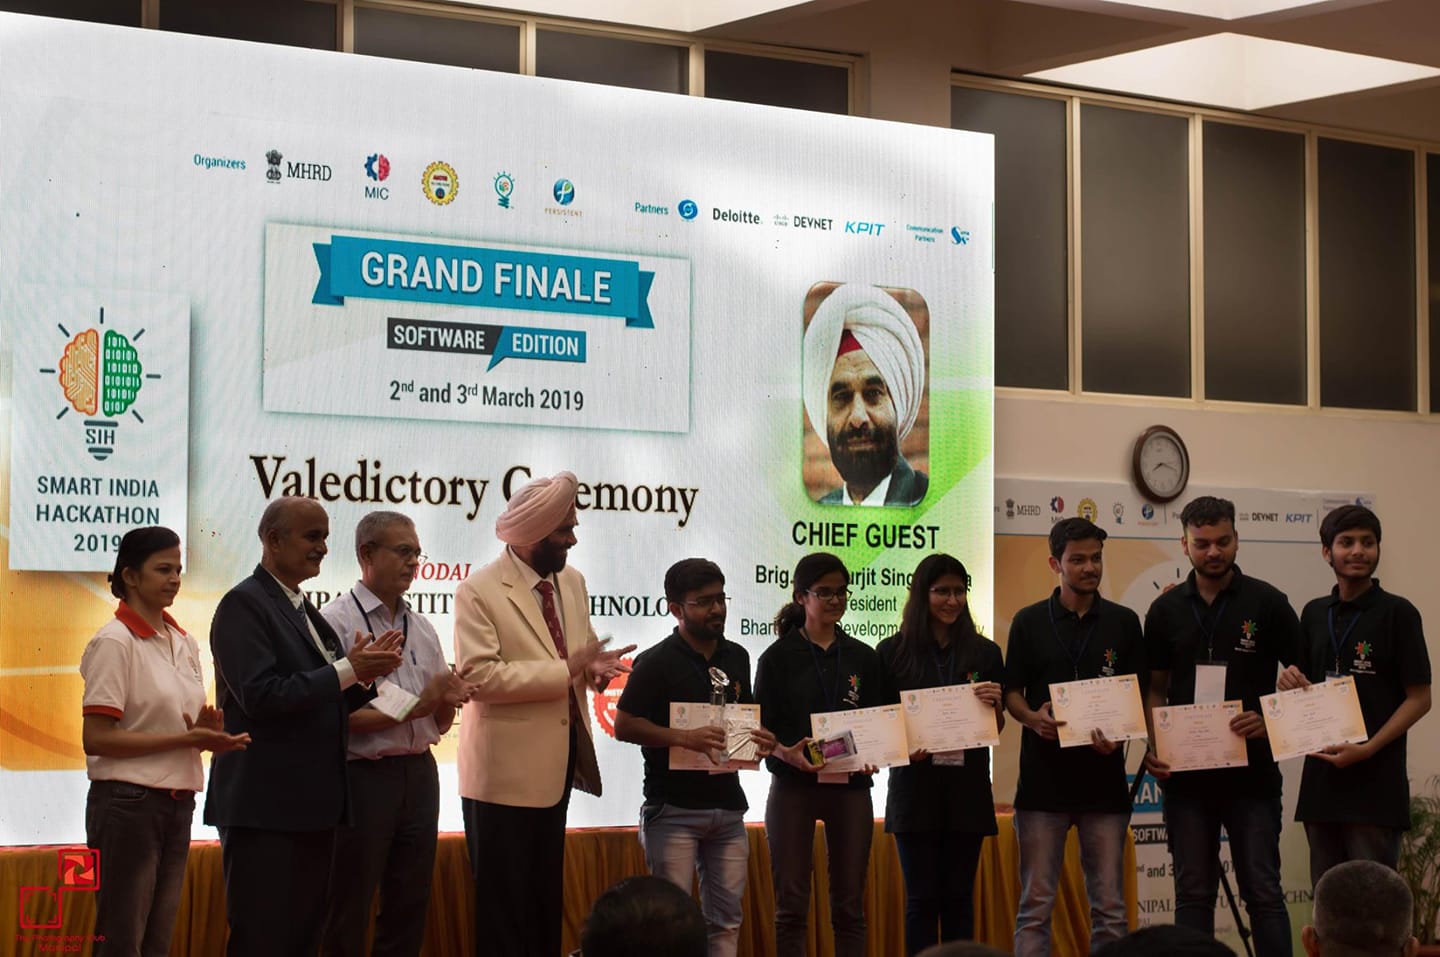 IETians won the grand finale of Smart India Hackathon-2019, conducted by MHRD in association with AICTE.